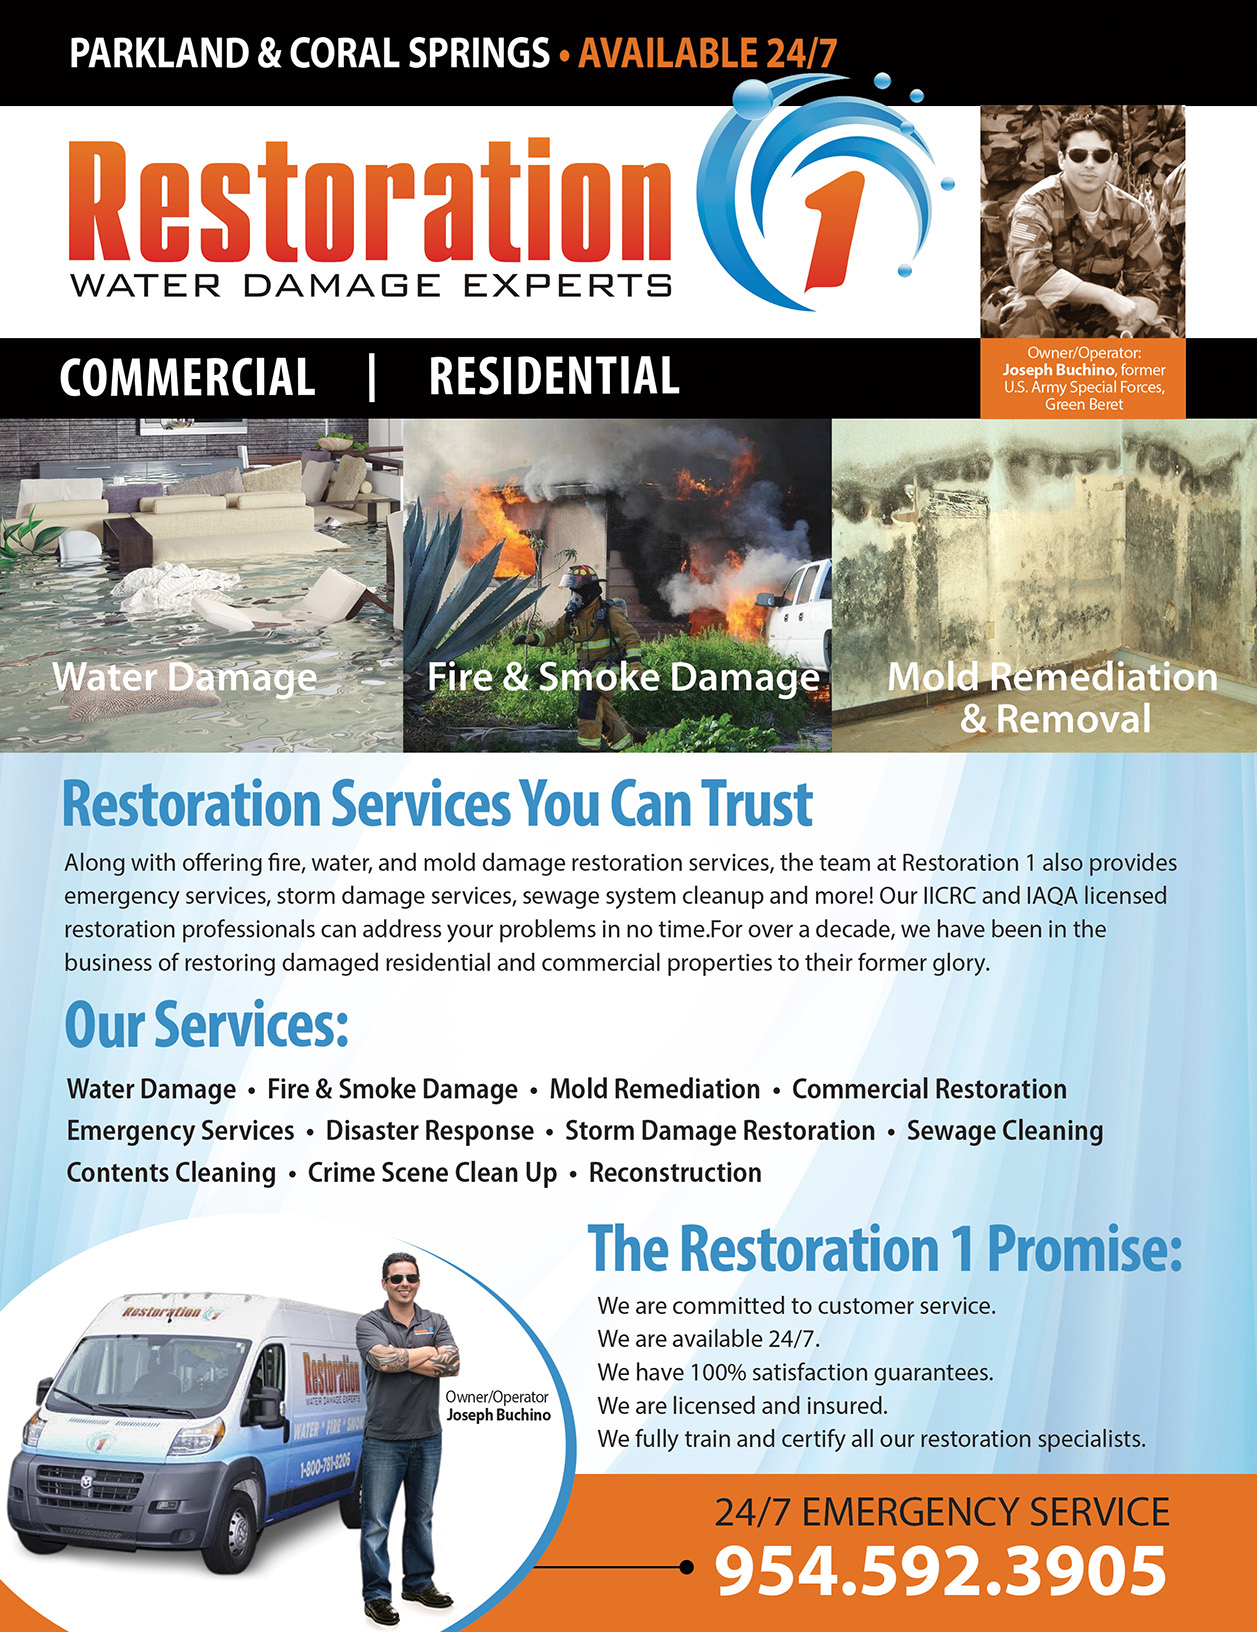 Back to New Again - Restoration 1 Water Damage Experts 